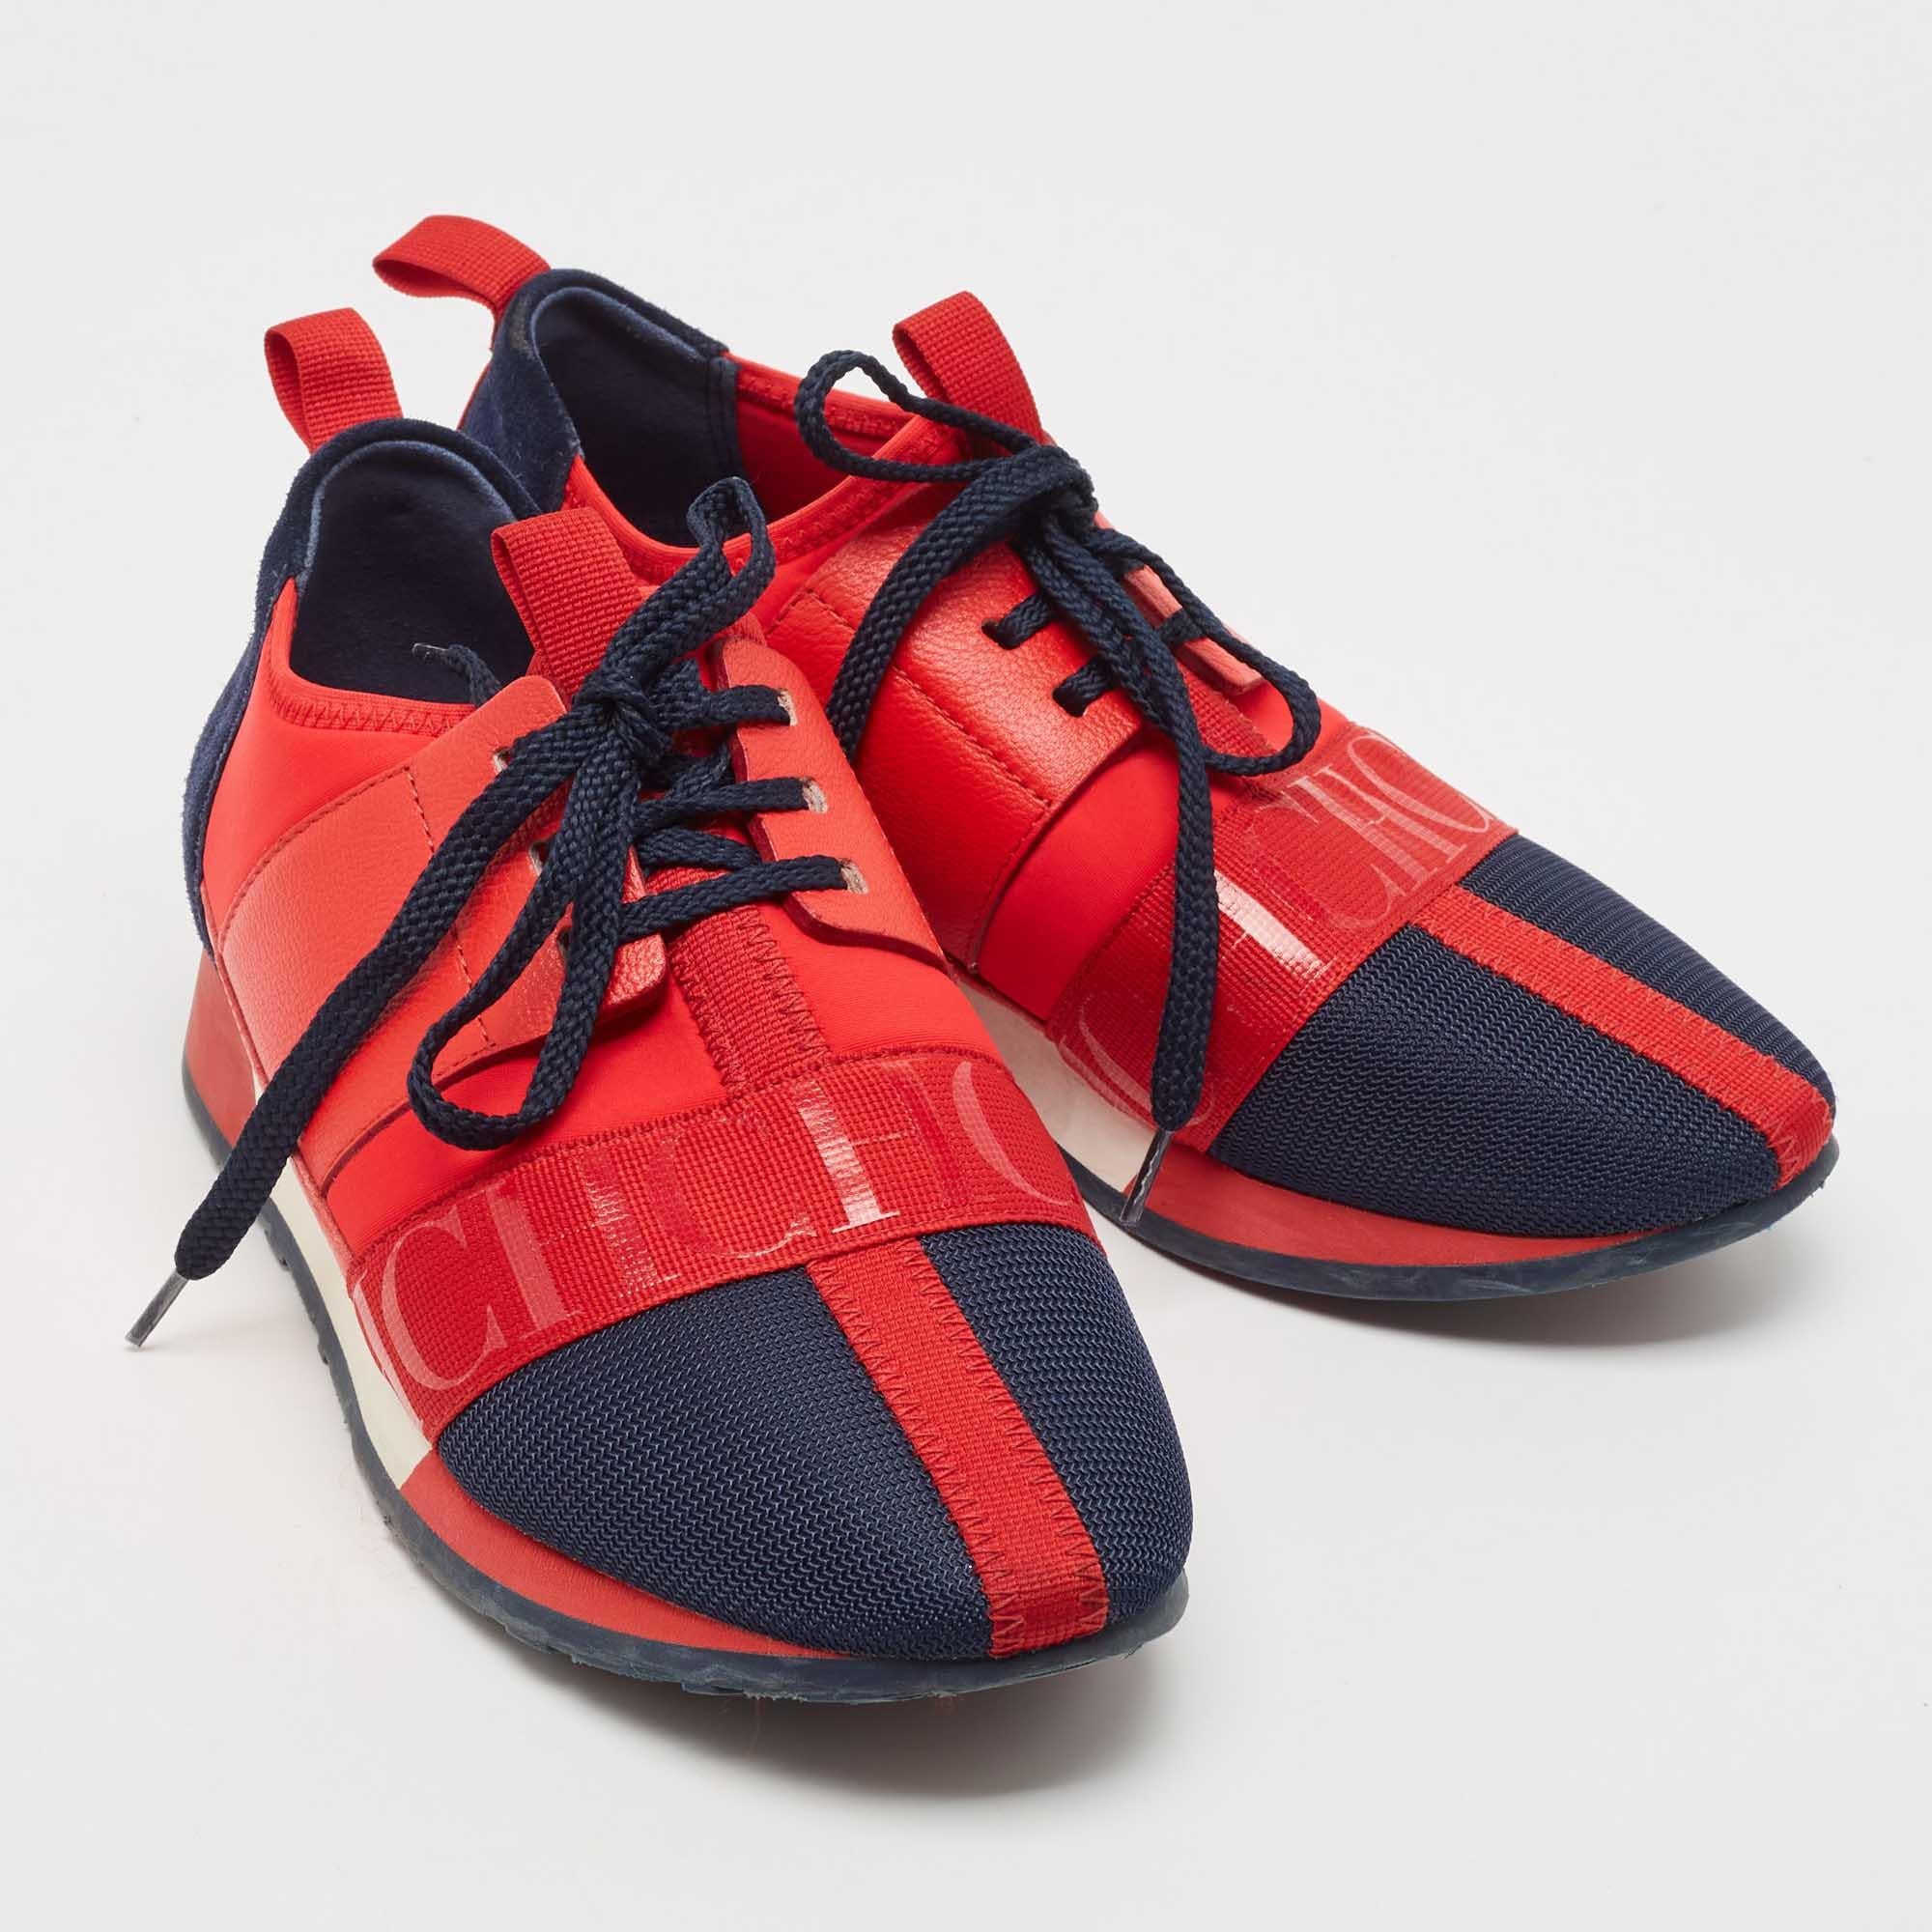 CH Carolina Herrera Red/Navy Blue Leather and Suede Low Top Sneakers Size 36 In Good Condition For Sale In Dubai, Al Qouz 2